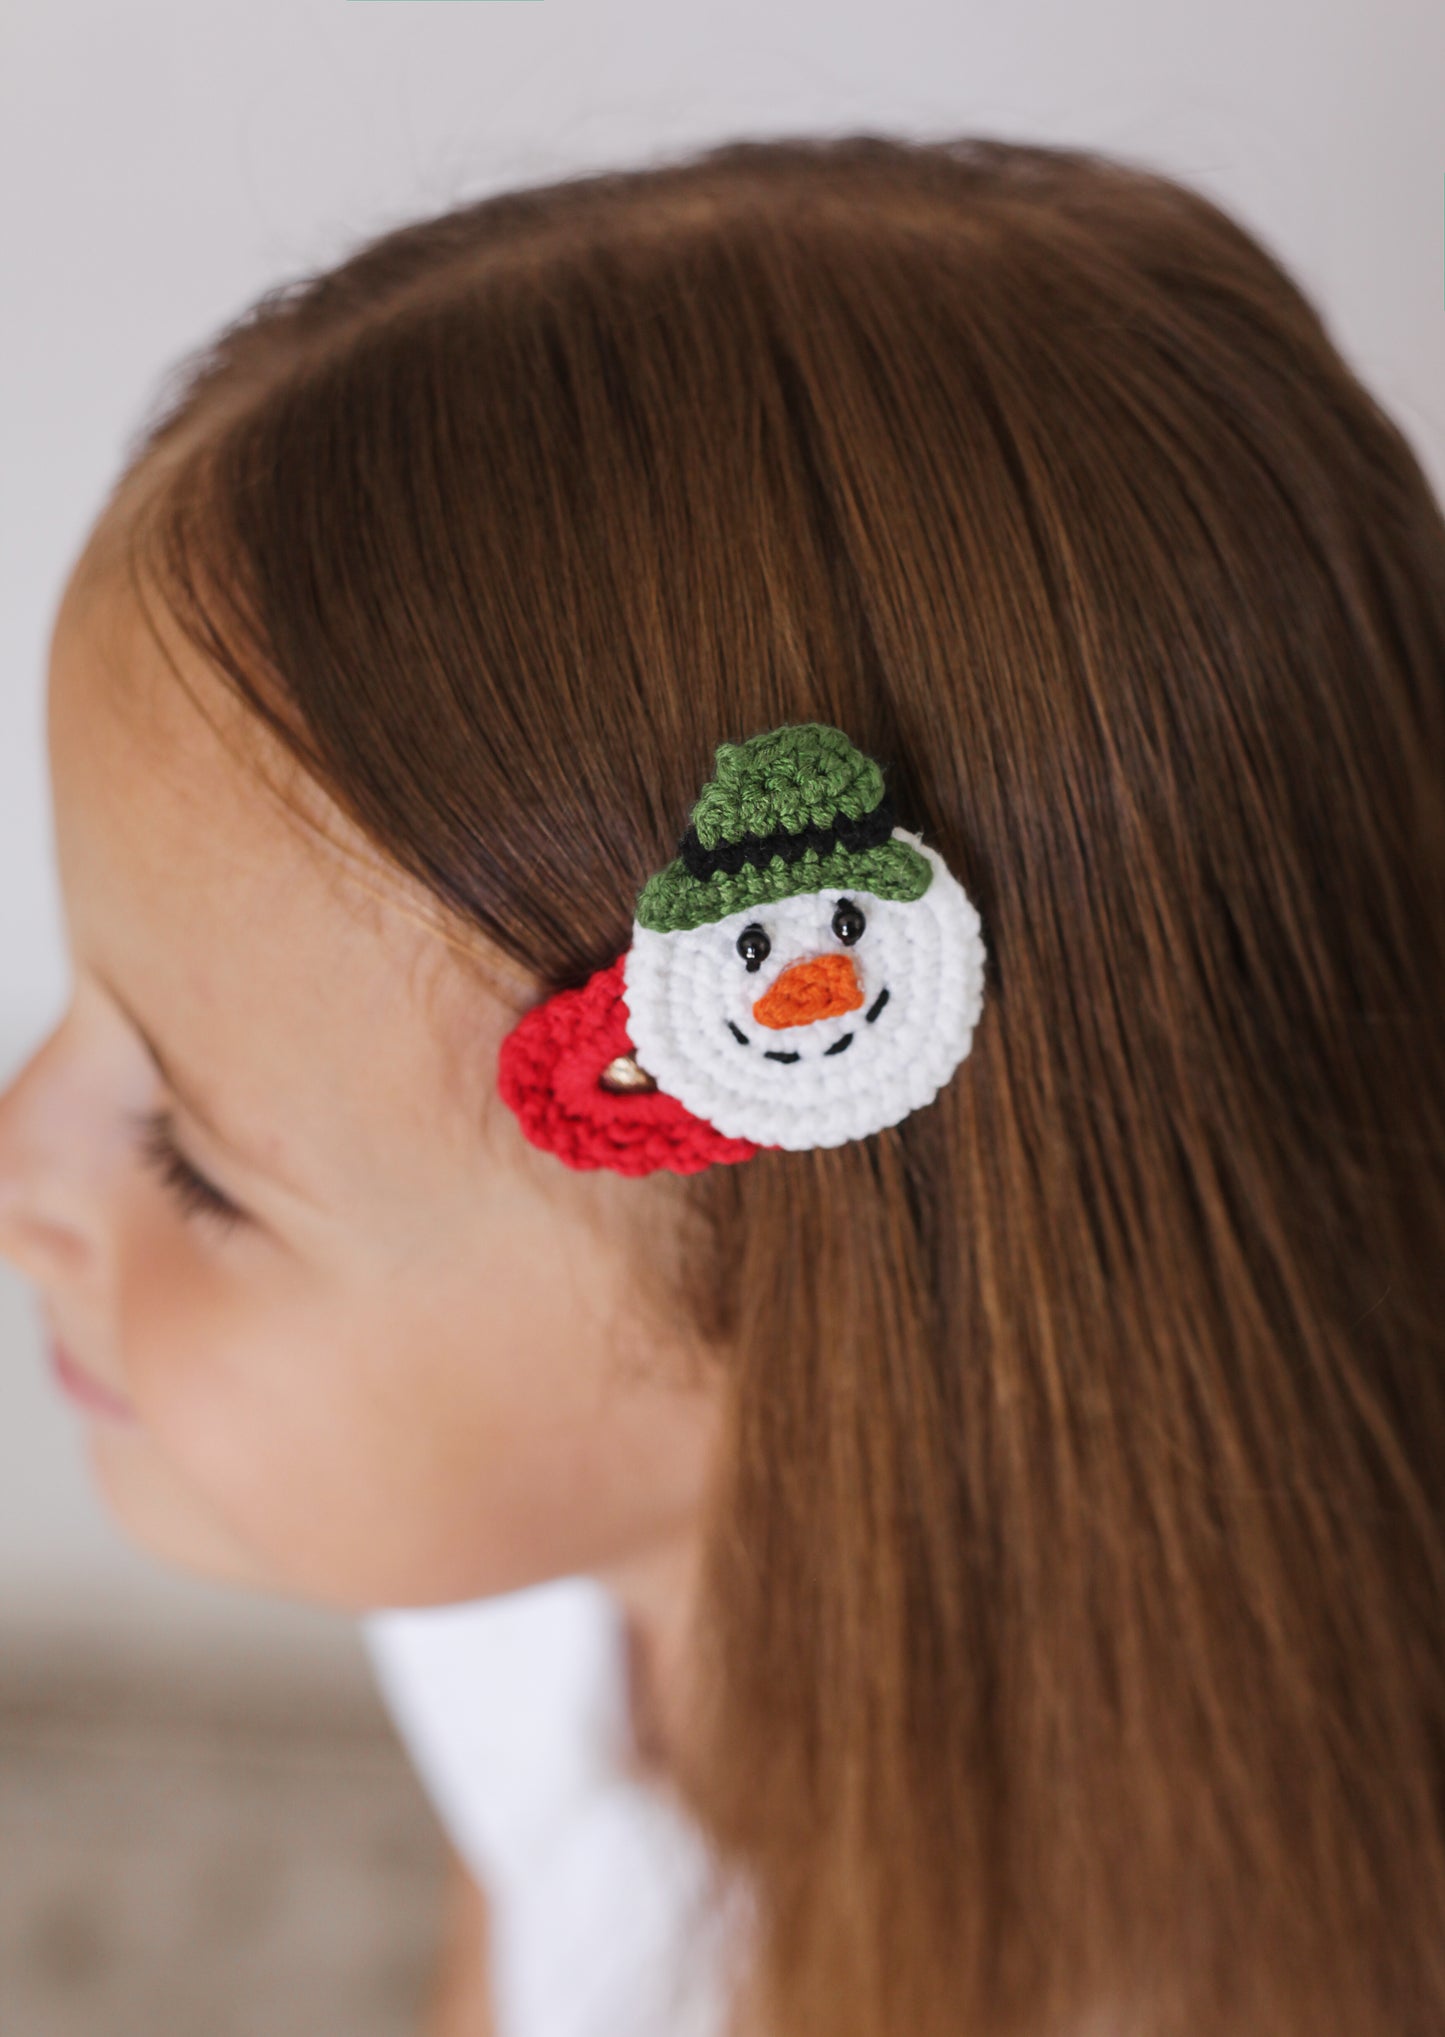 Christmas Trendy Girls' Gifts : Crochet Hair Clips . Accessories for Teens, Granddaughters, Newborn Girl Outfits, with Embroidery Designs